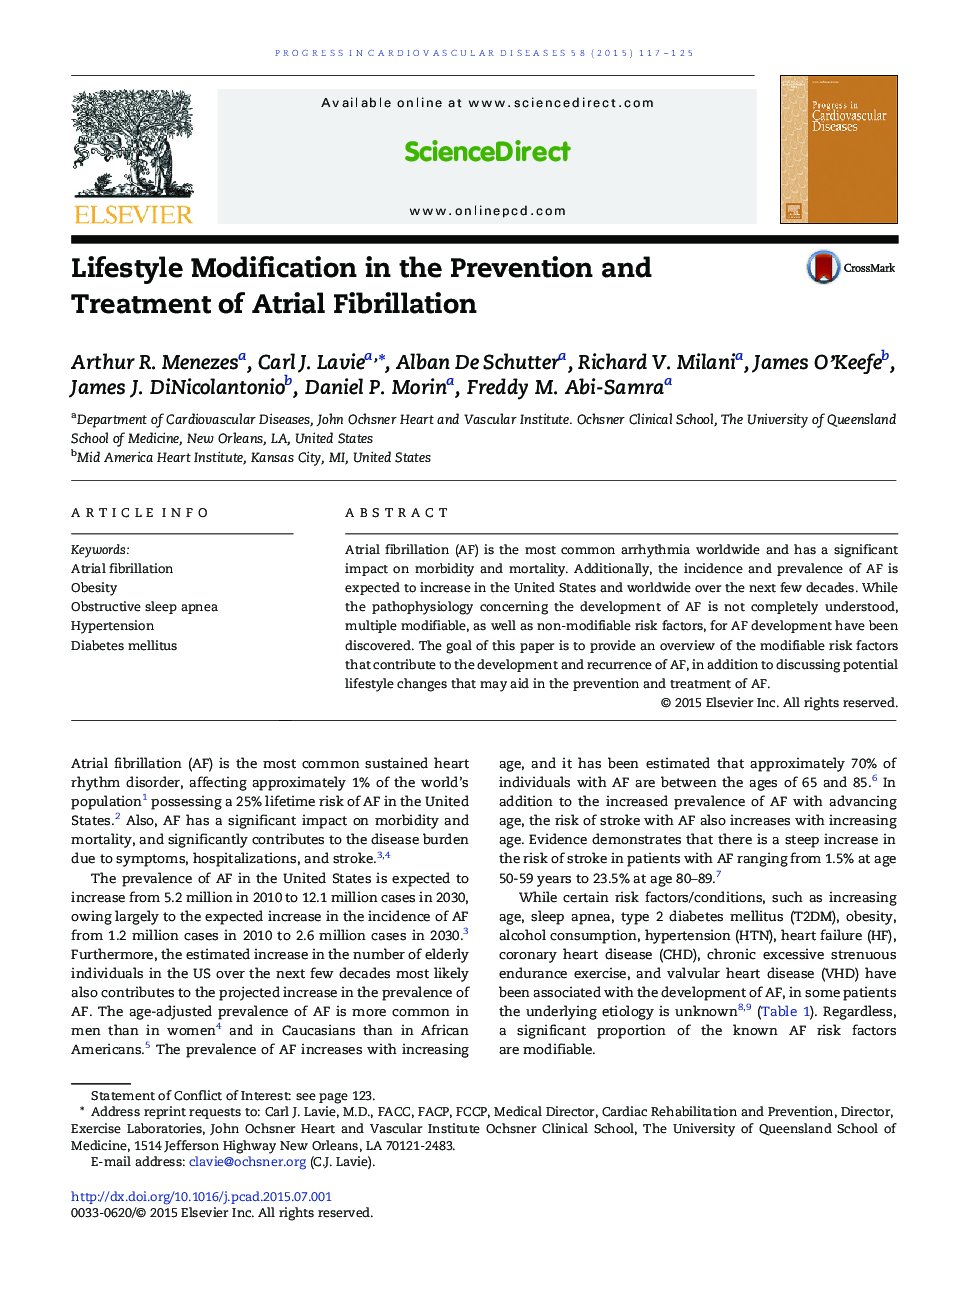 Lifestyle Modification in the Prevention and Treatment of Atrial Fibrillation 